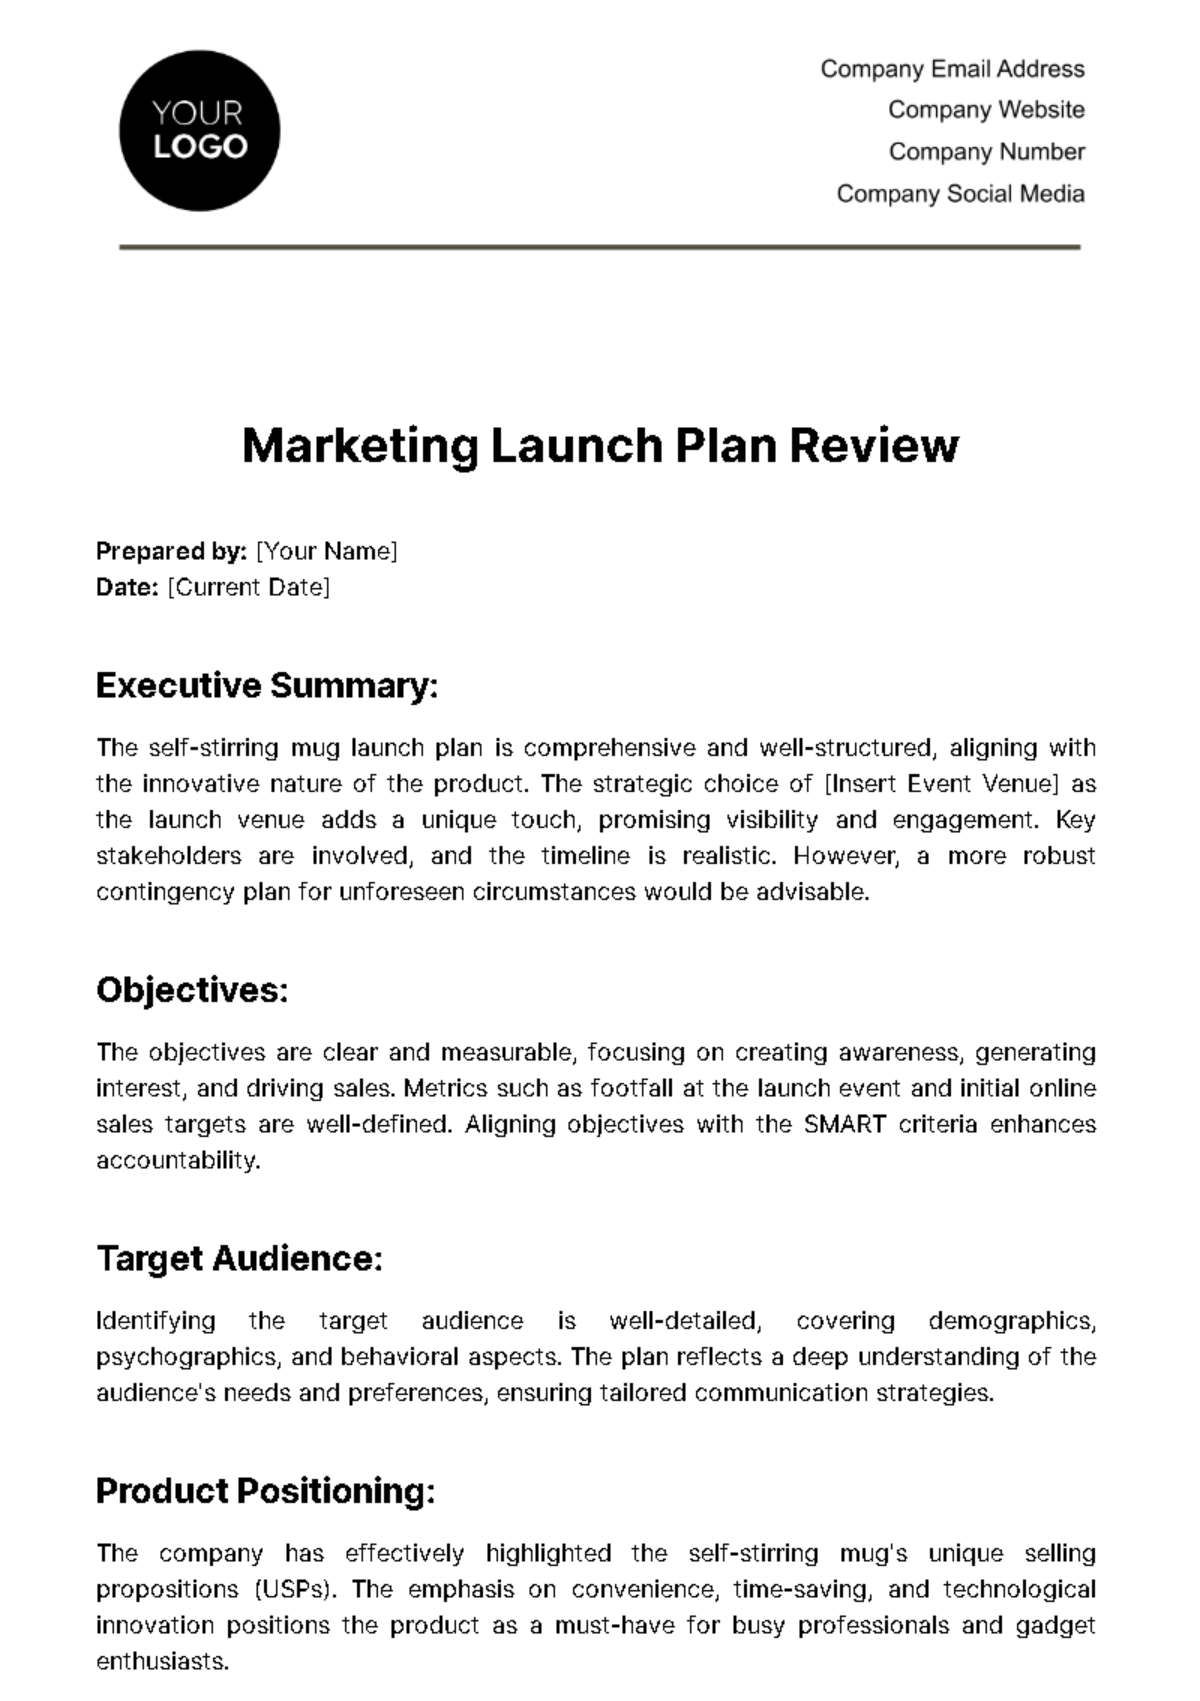 Free Marketing Launch Plan Review Template